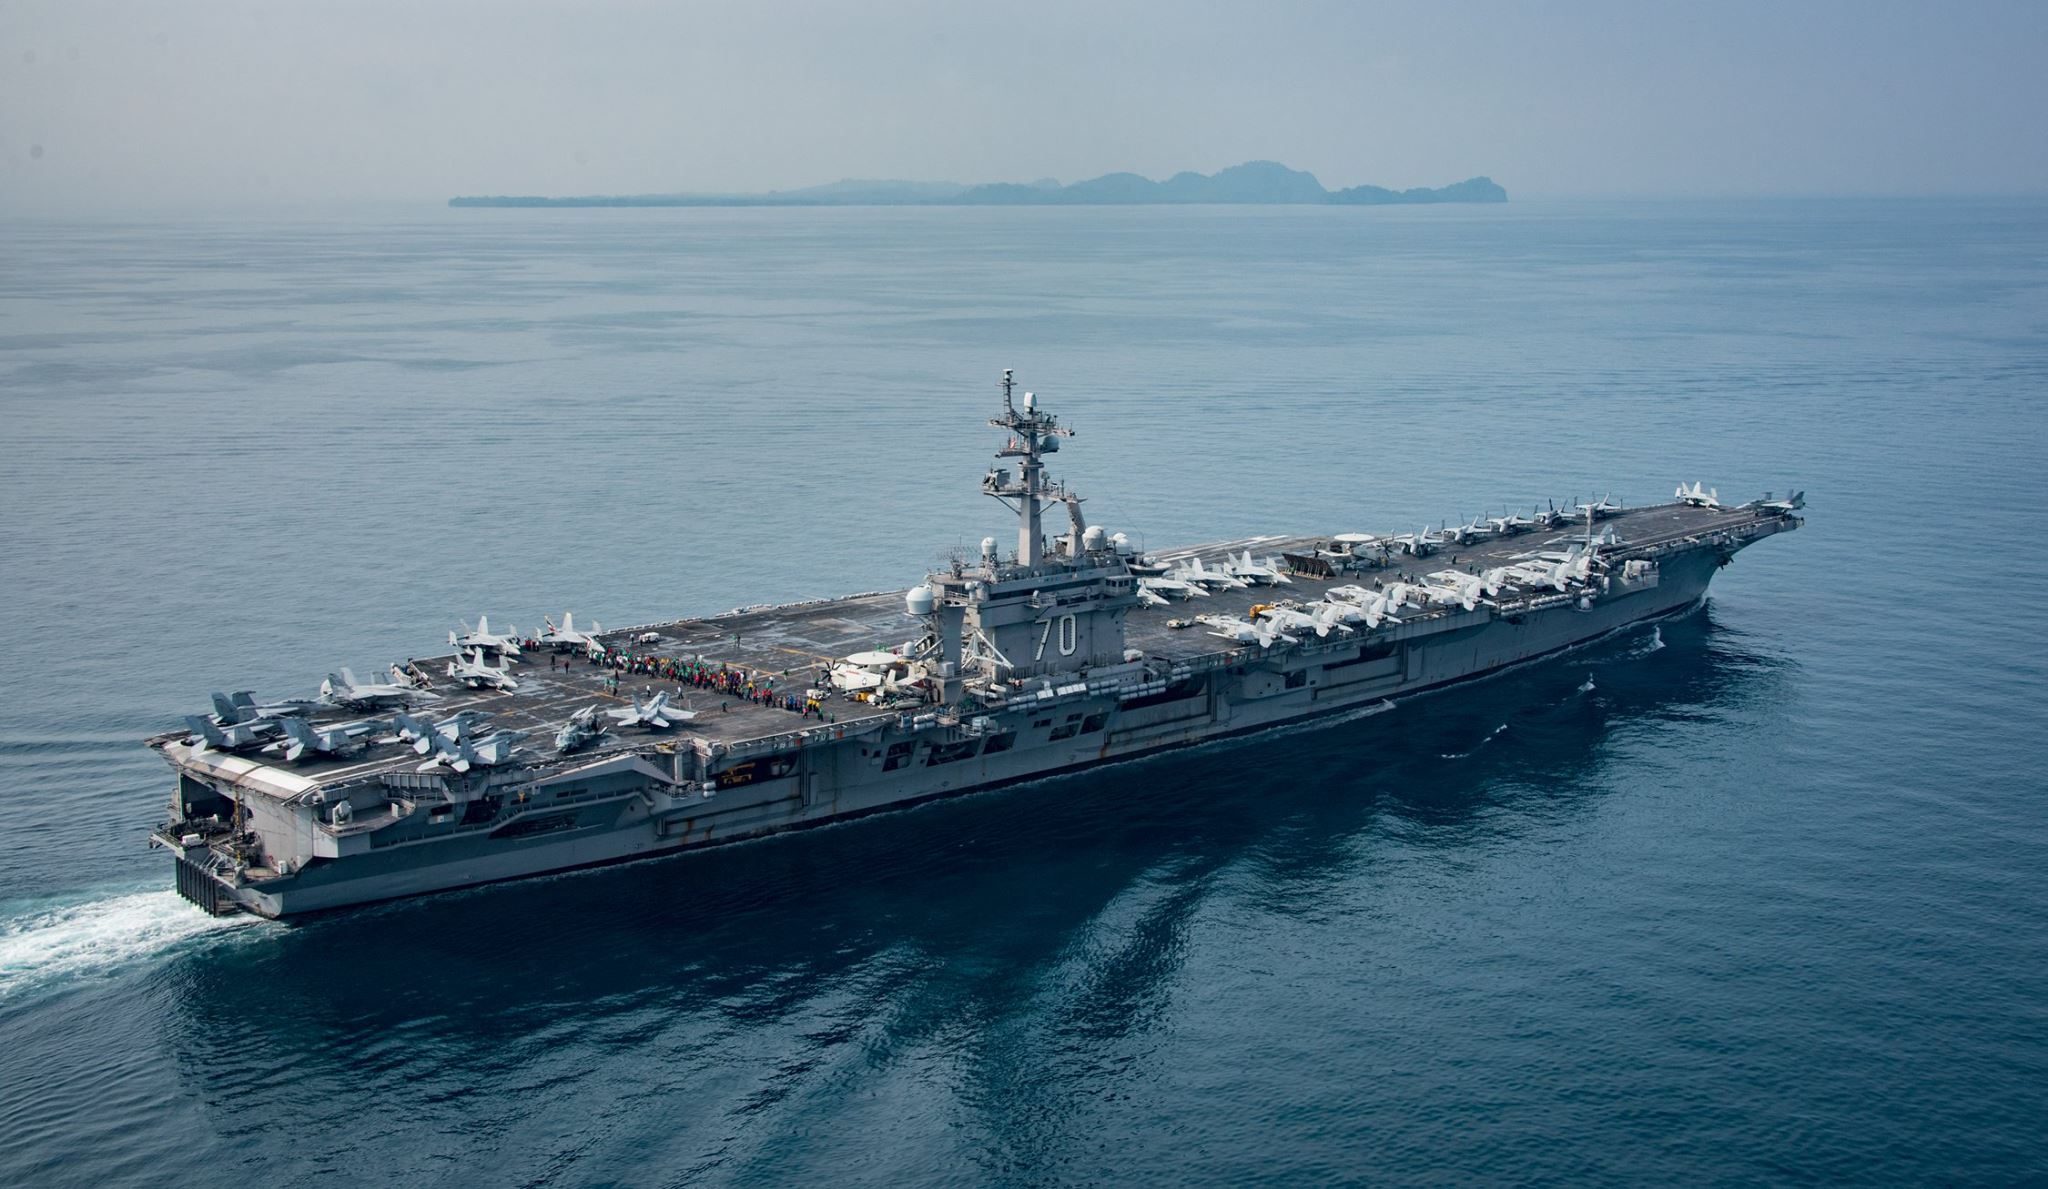 U.S. tries to clear waters after North Korea ‘armada’ confusion